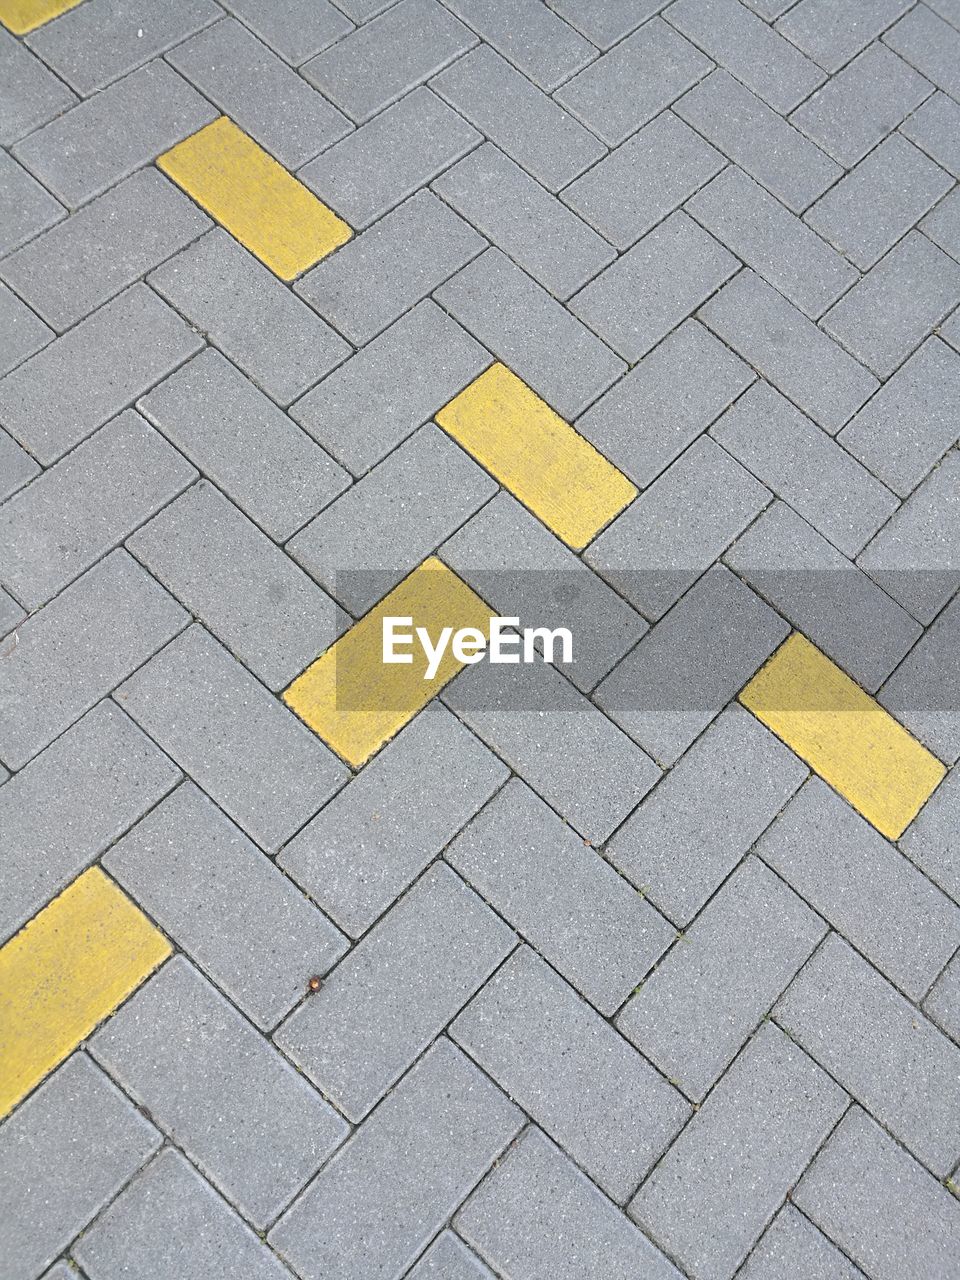 HIGH ANGLE VIEW OF YELLOW ARROW SYMBOL ON ROAD